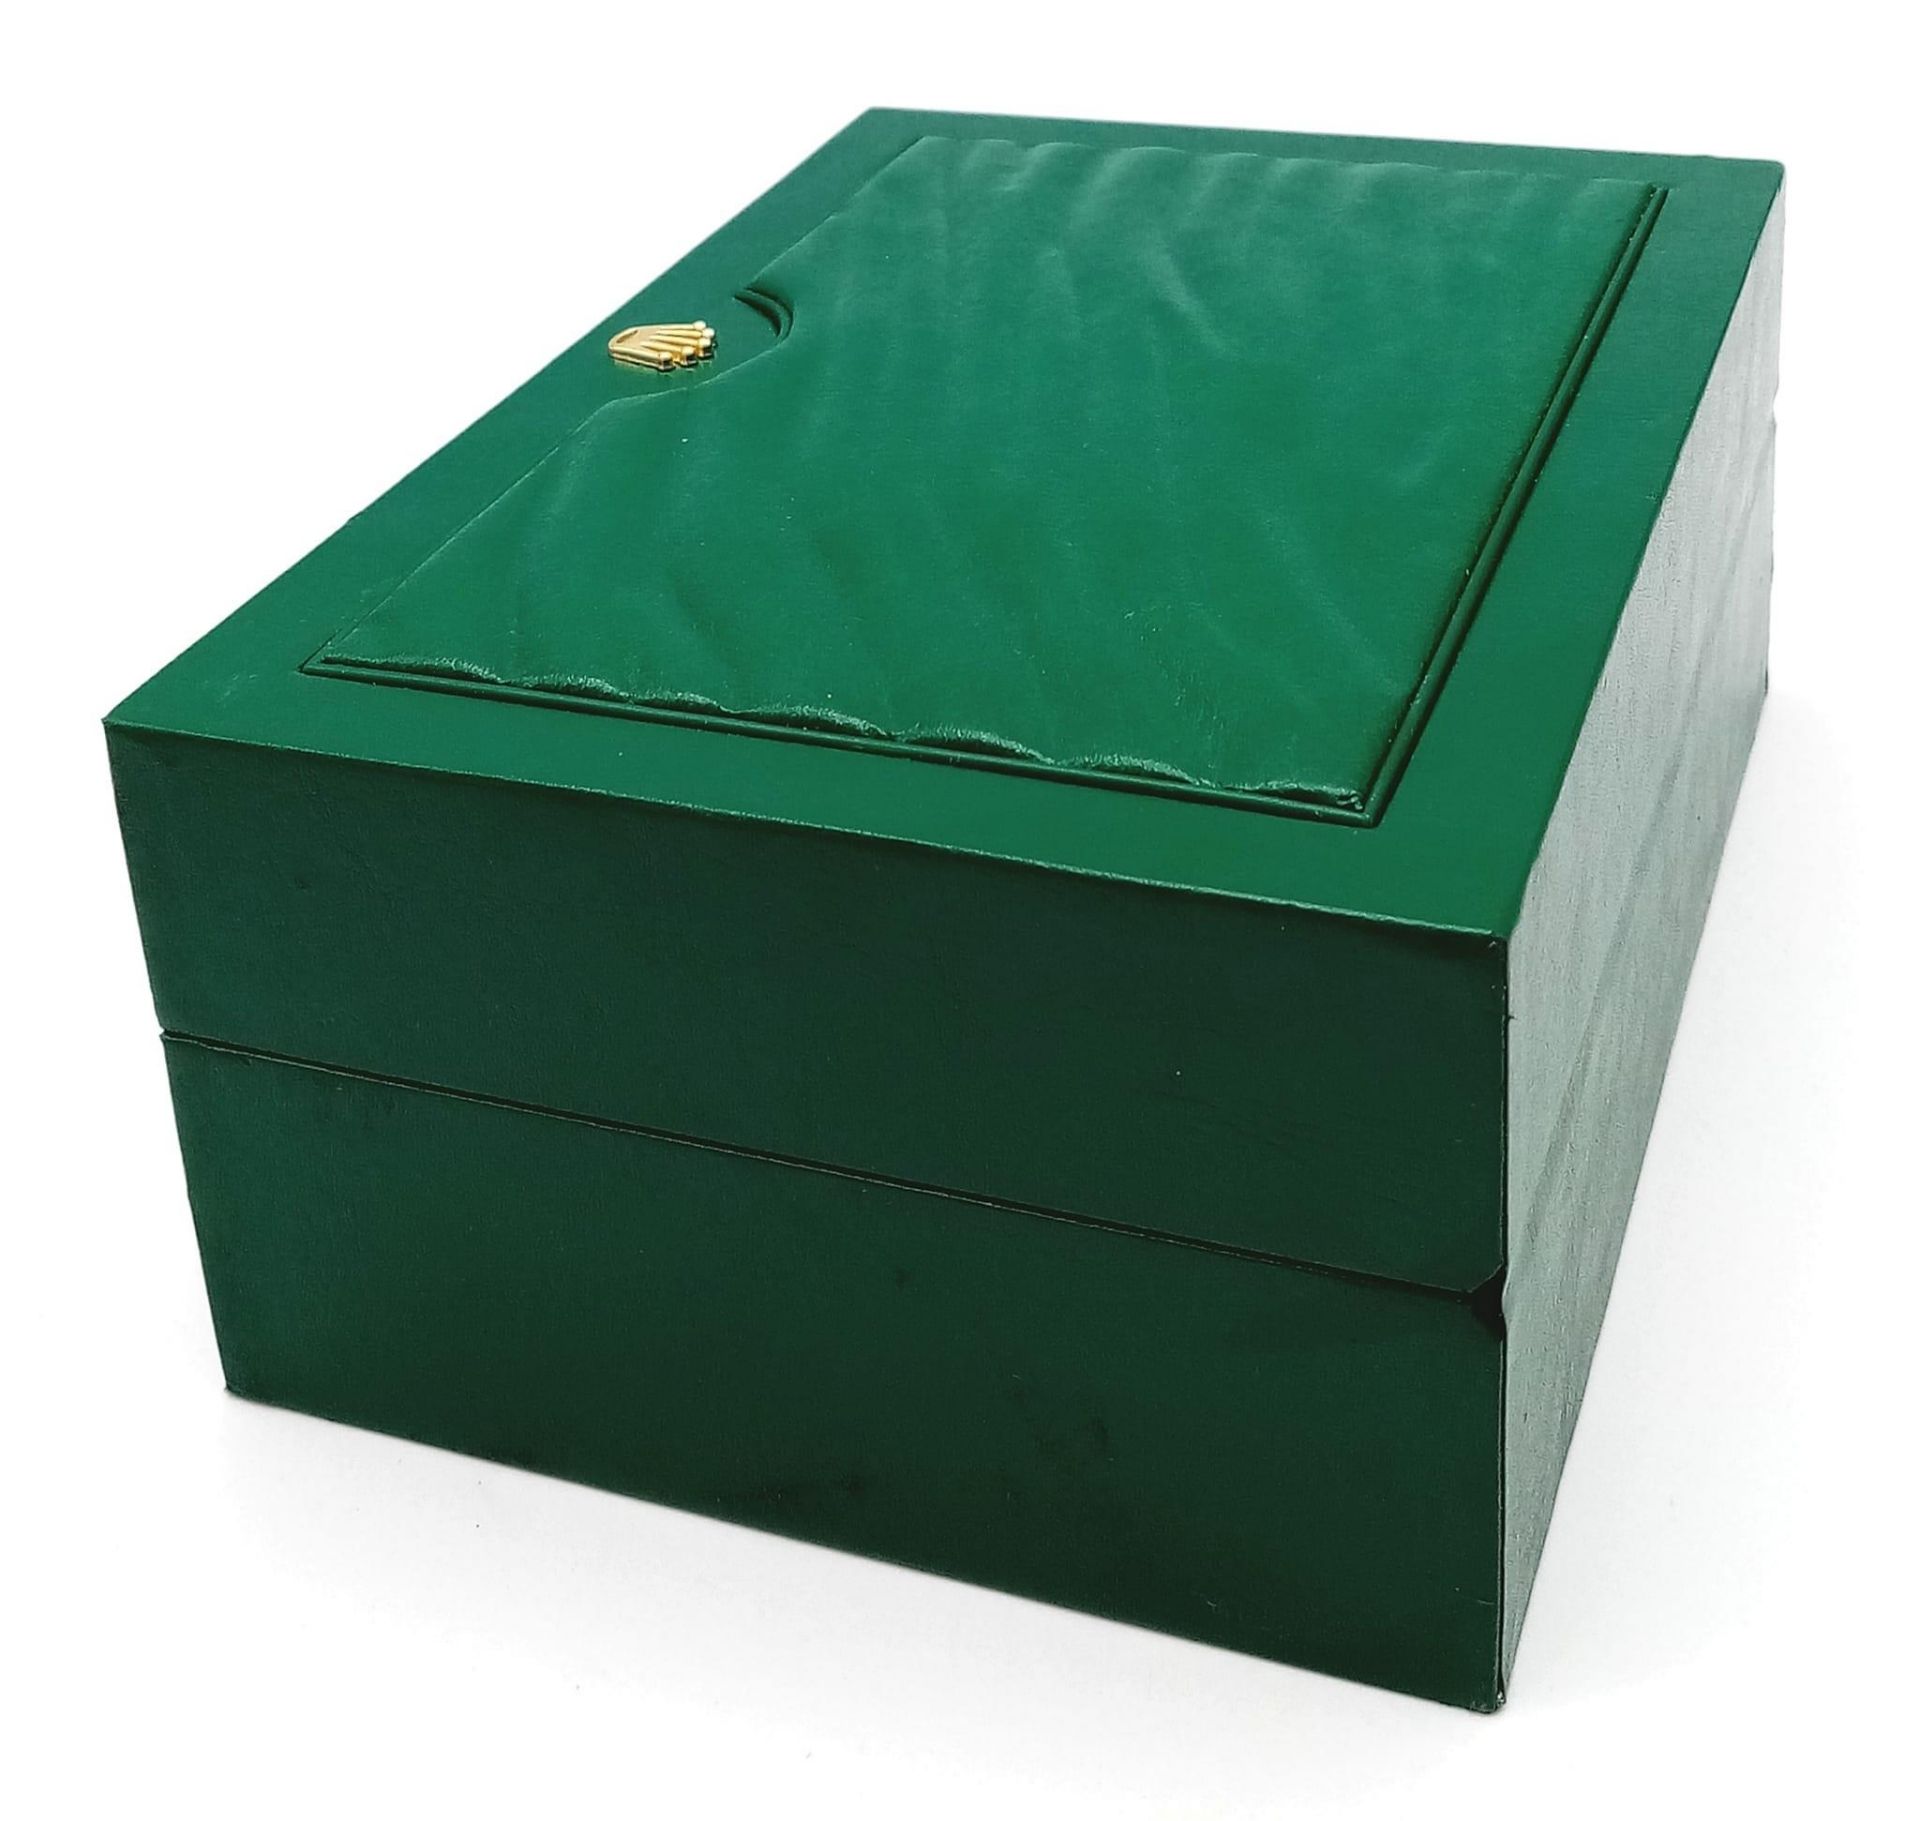 A Rolex Watch Case. Green ruffled exterior. Single watch space interior. 18cm x 13cm - Image 8 of 13